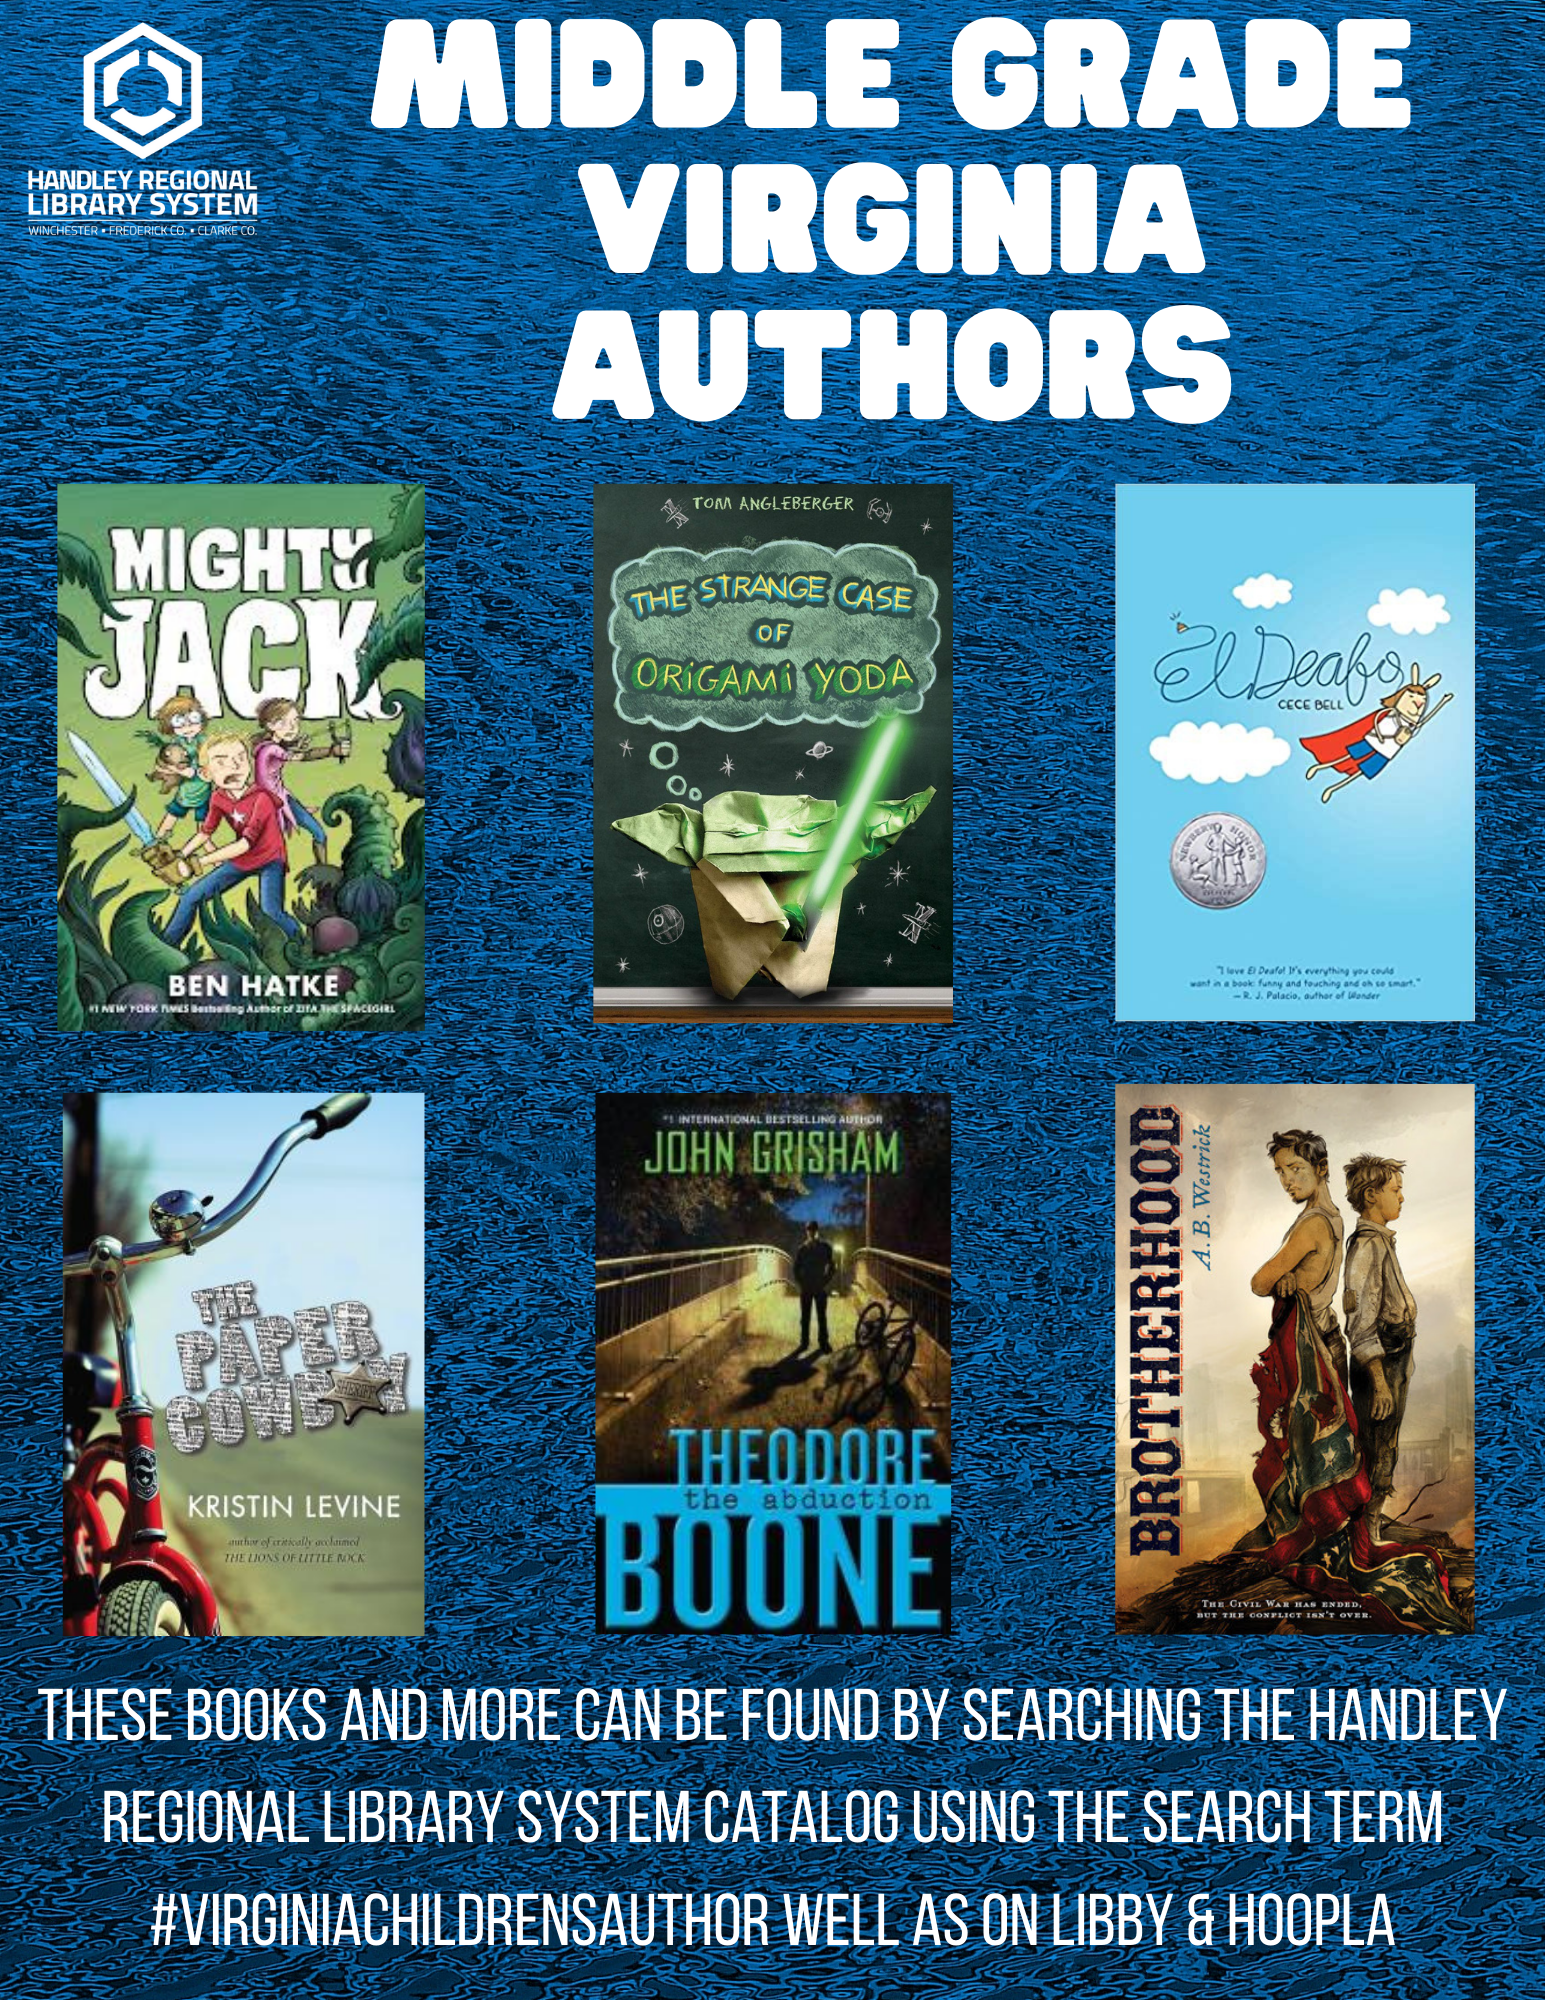 Middle Grade Virginia Authors Book Covers